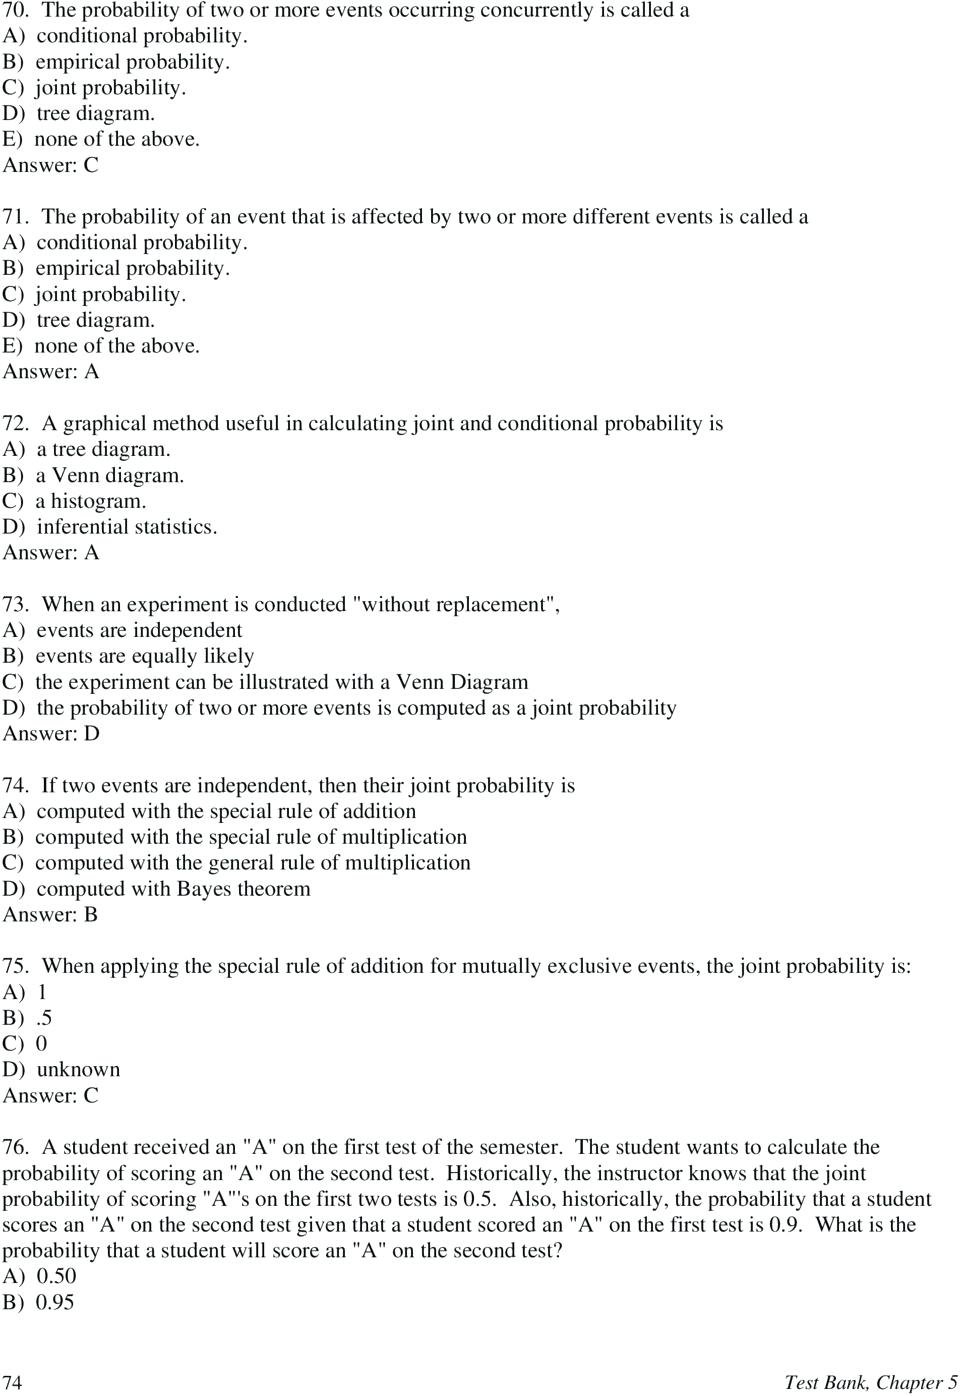 Probability Mutually Exclusive Events Worksheet Within Compound Events Worksheet Answer Key